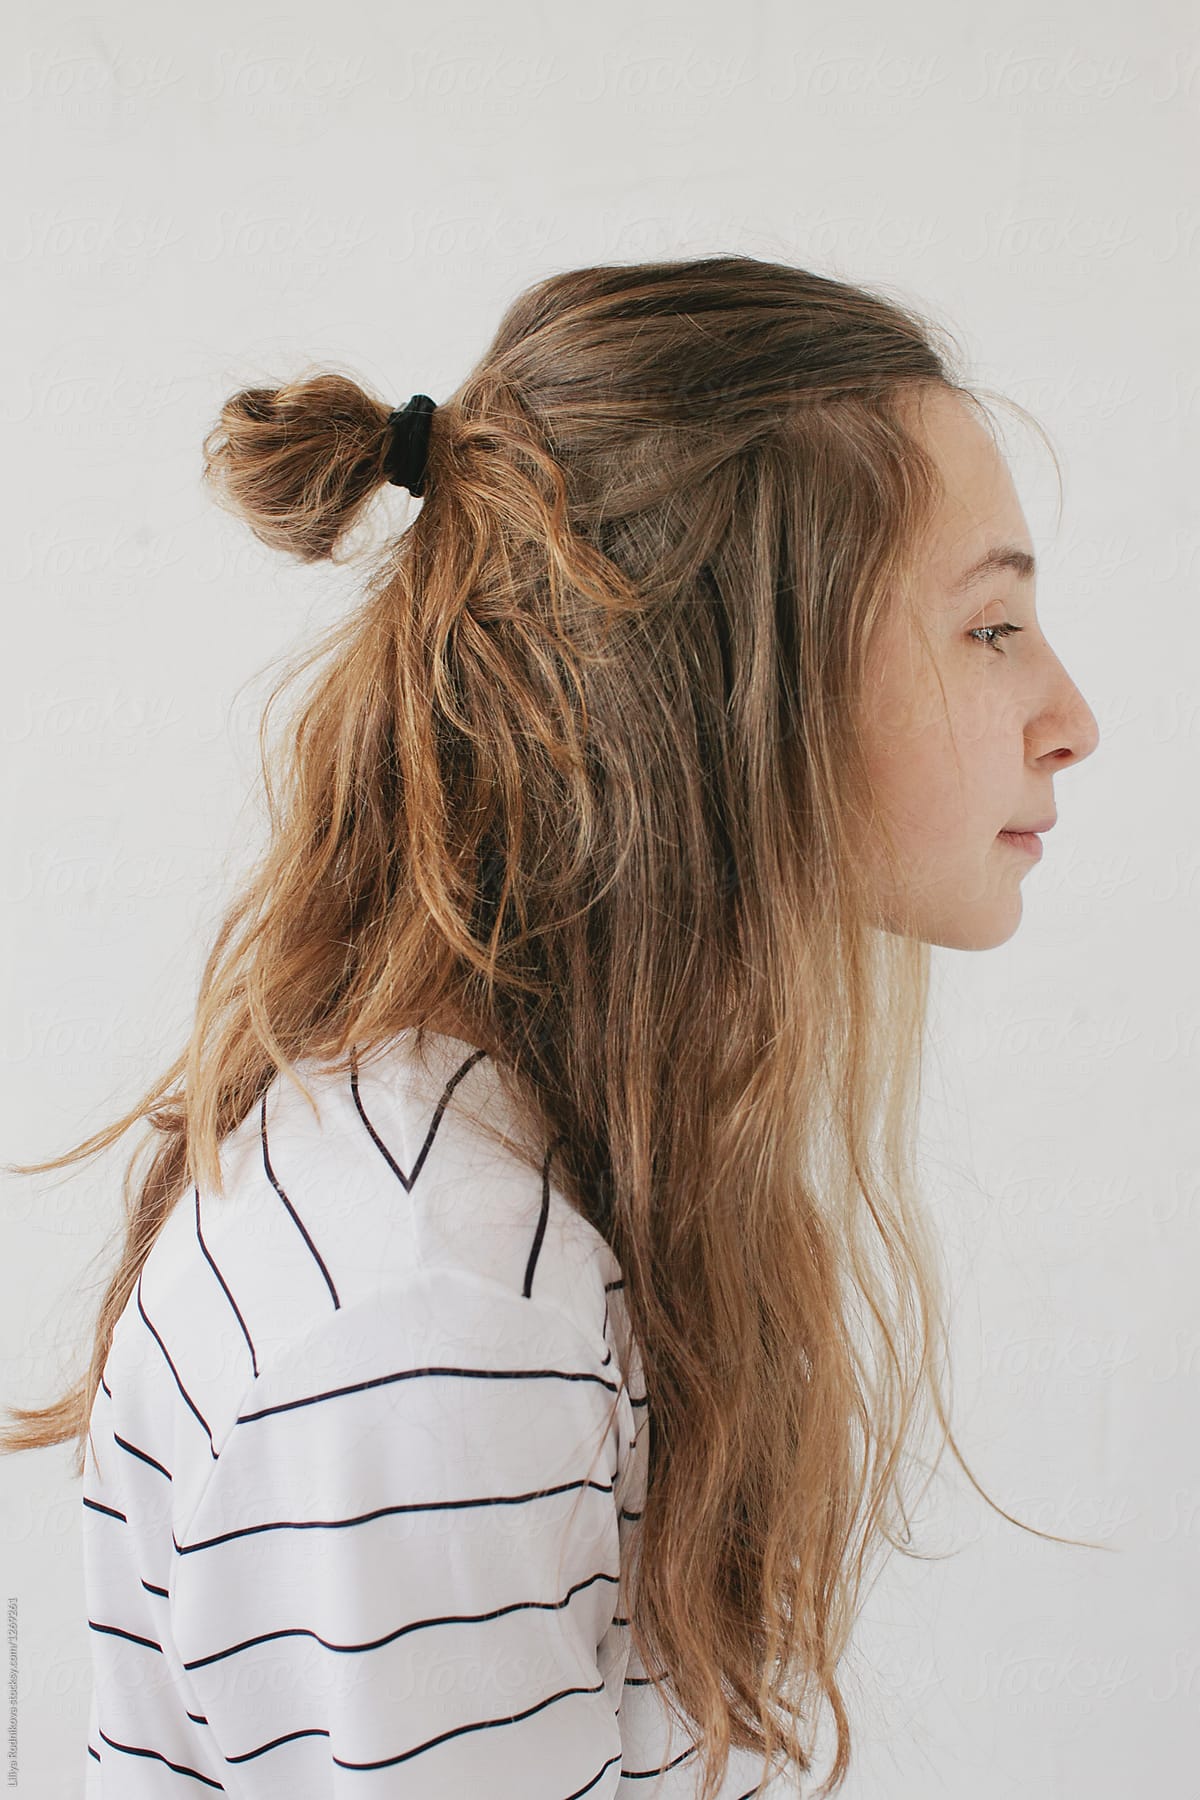 Young woman with long hair in profile